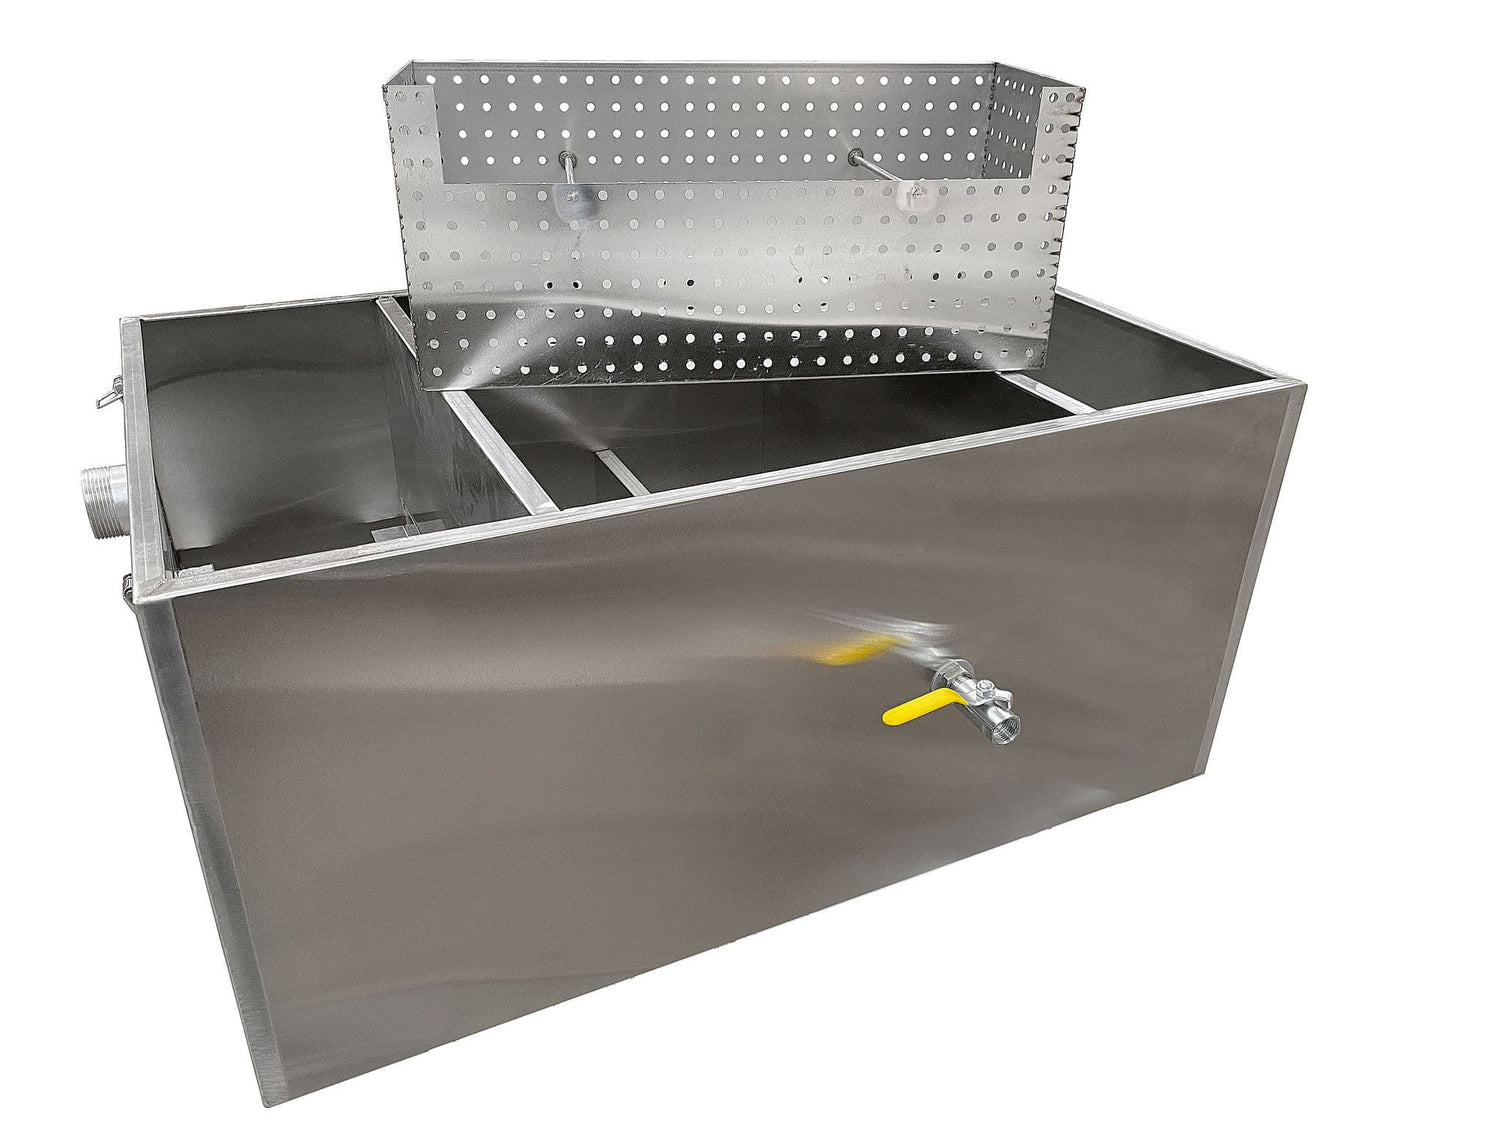 Manual Grease Traps